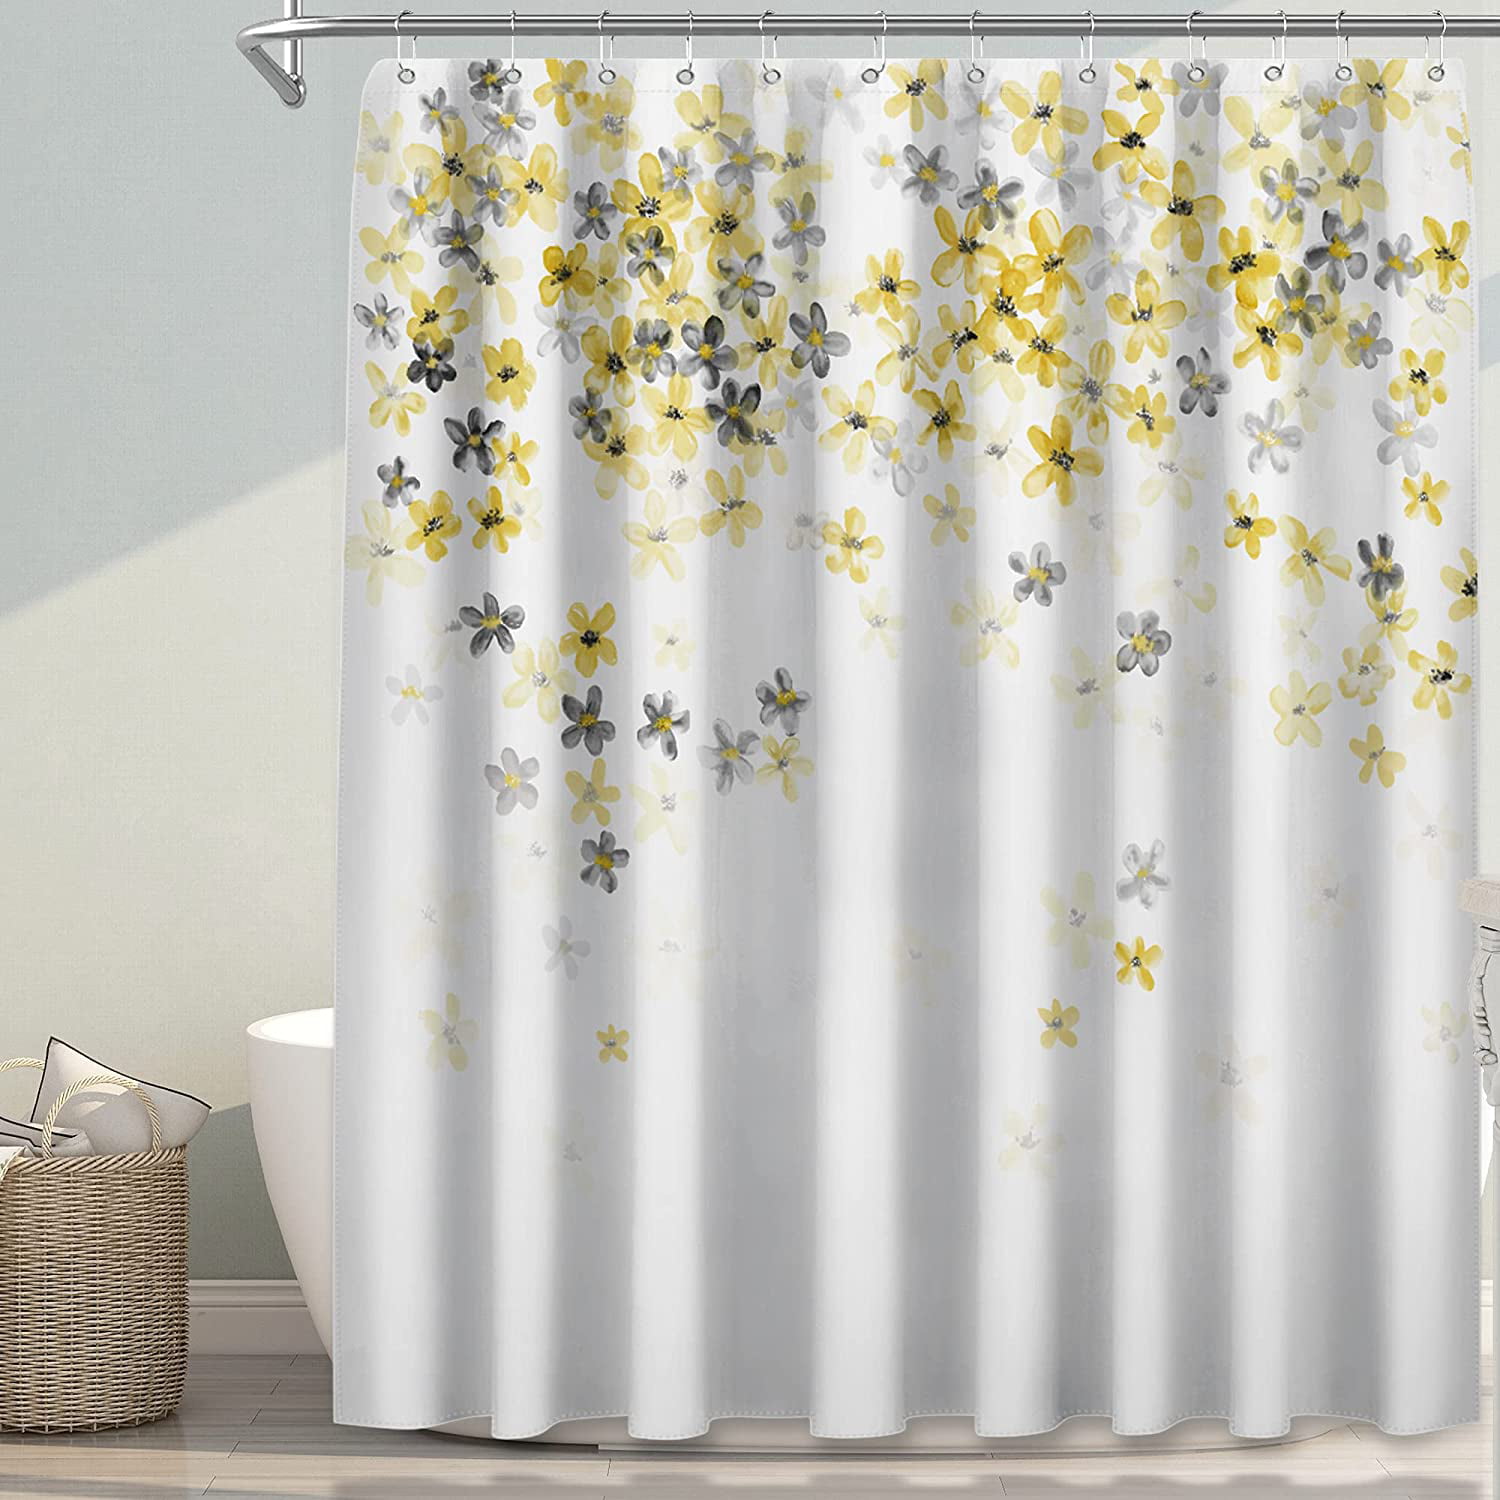 Details about   Farmhouse Rustic Floral Shower Curtain Country Flowers Grey Wooden Fabric Bath 